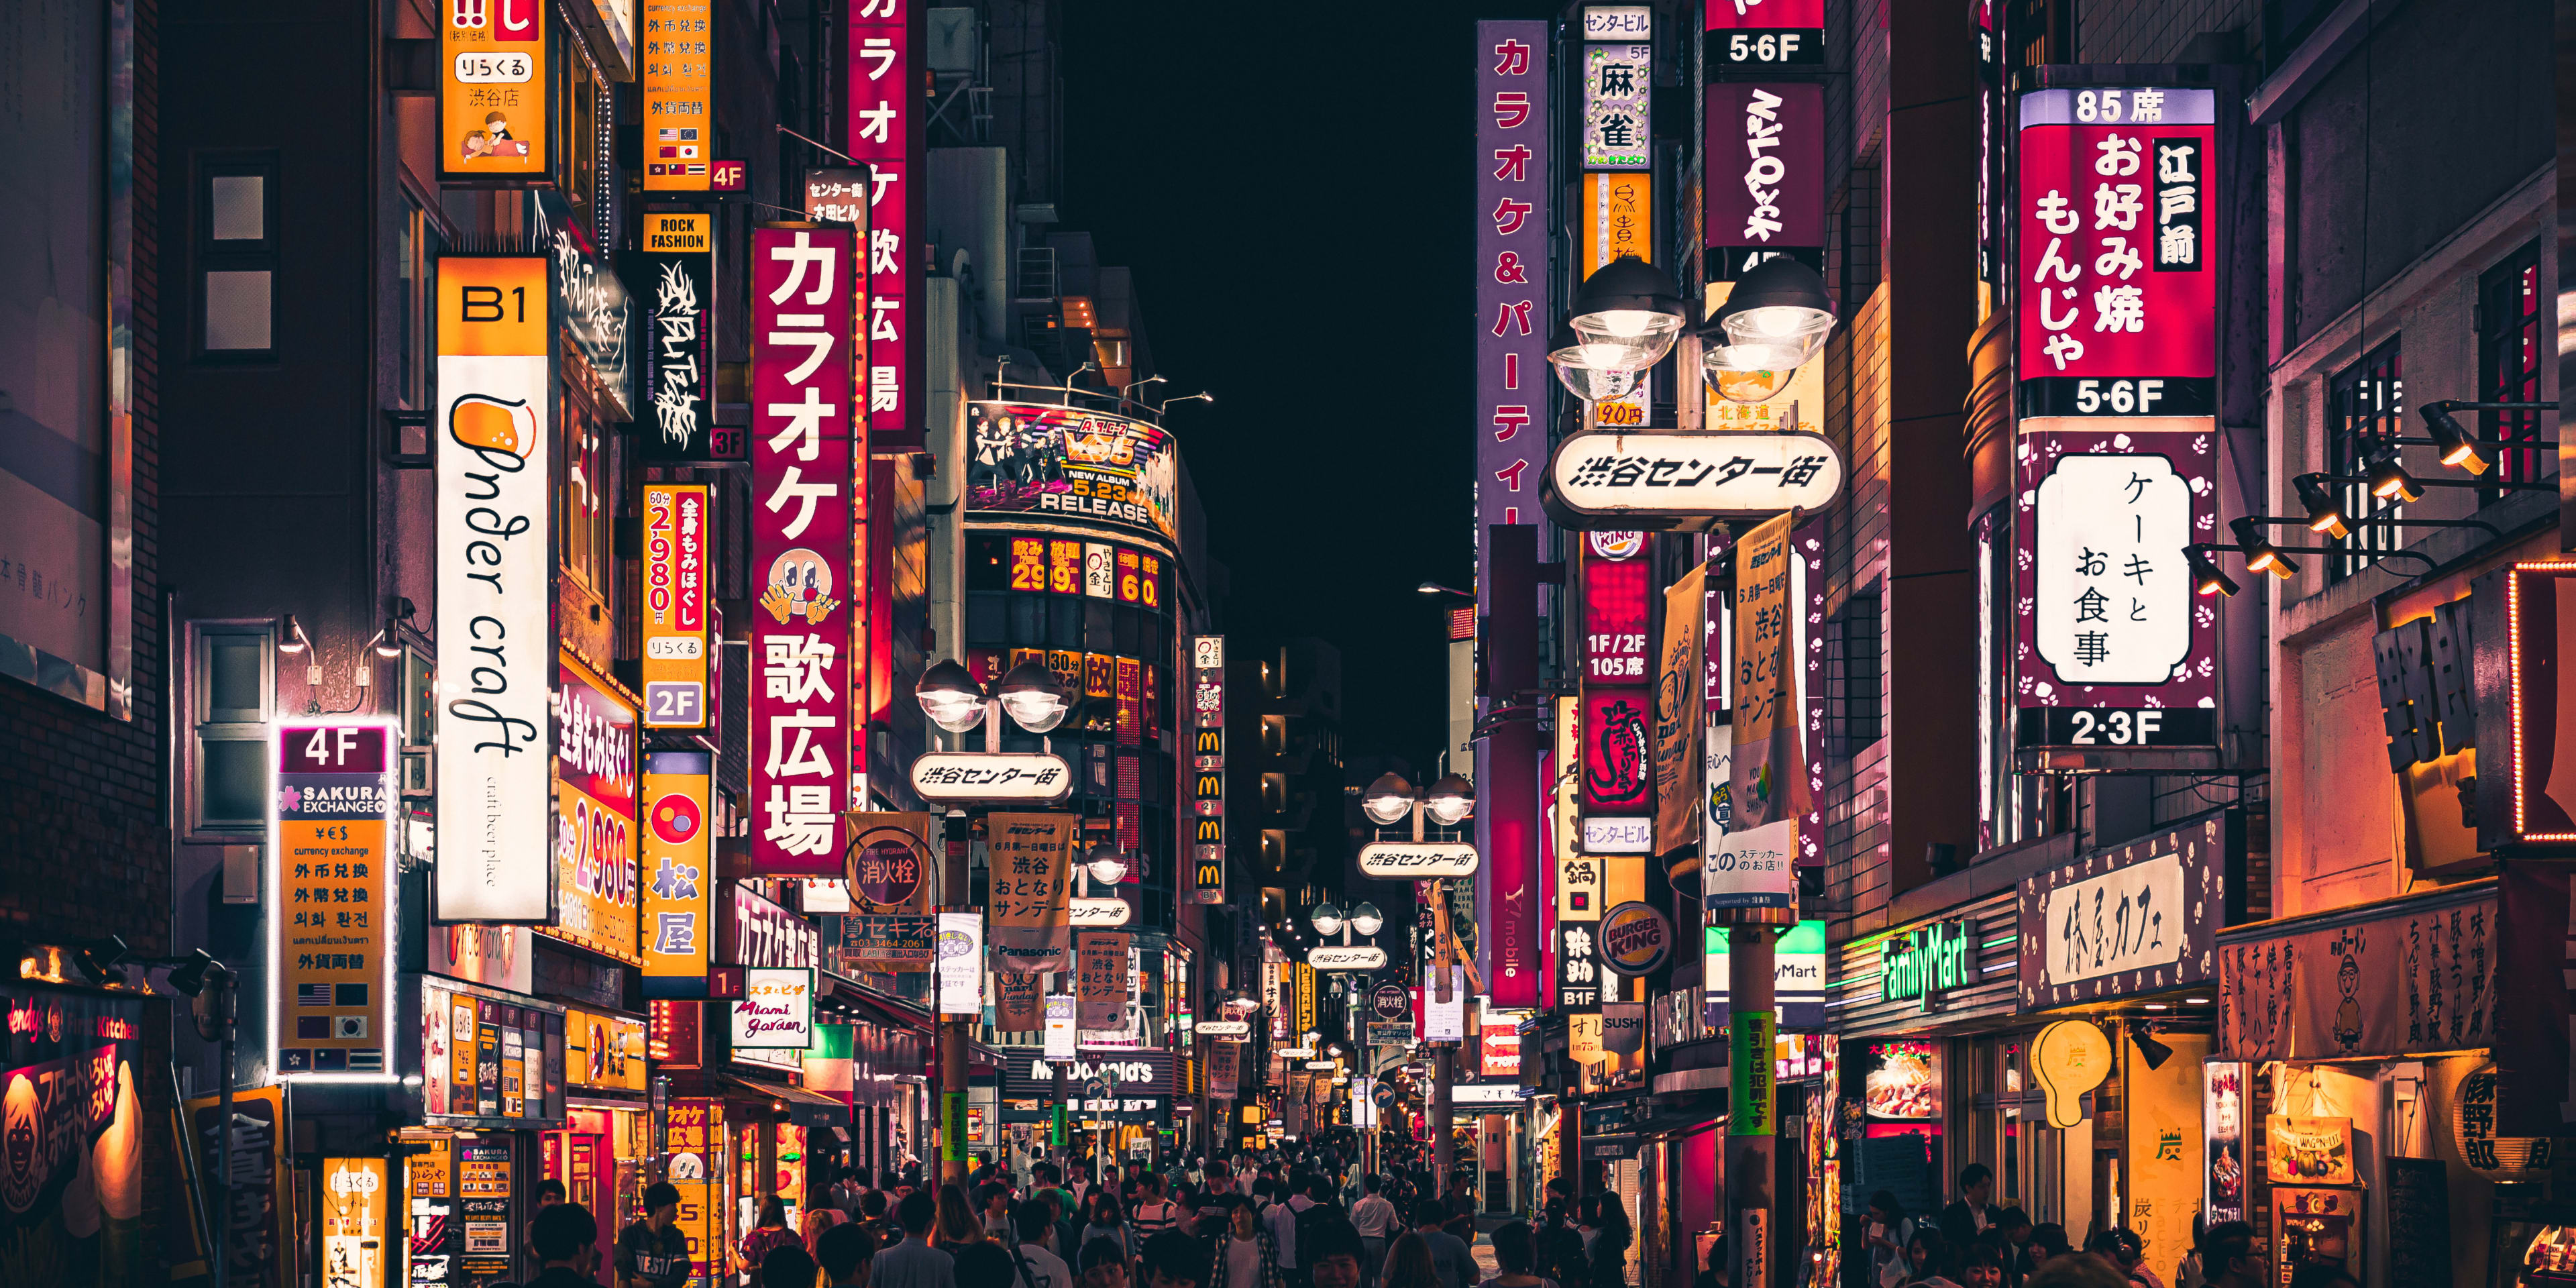 Busy street at night in Tokyo, Japan